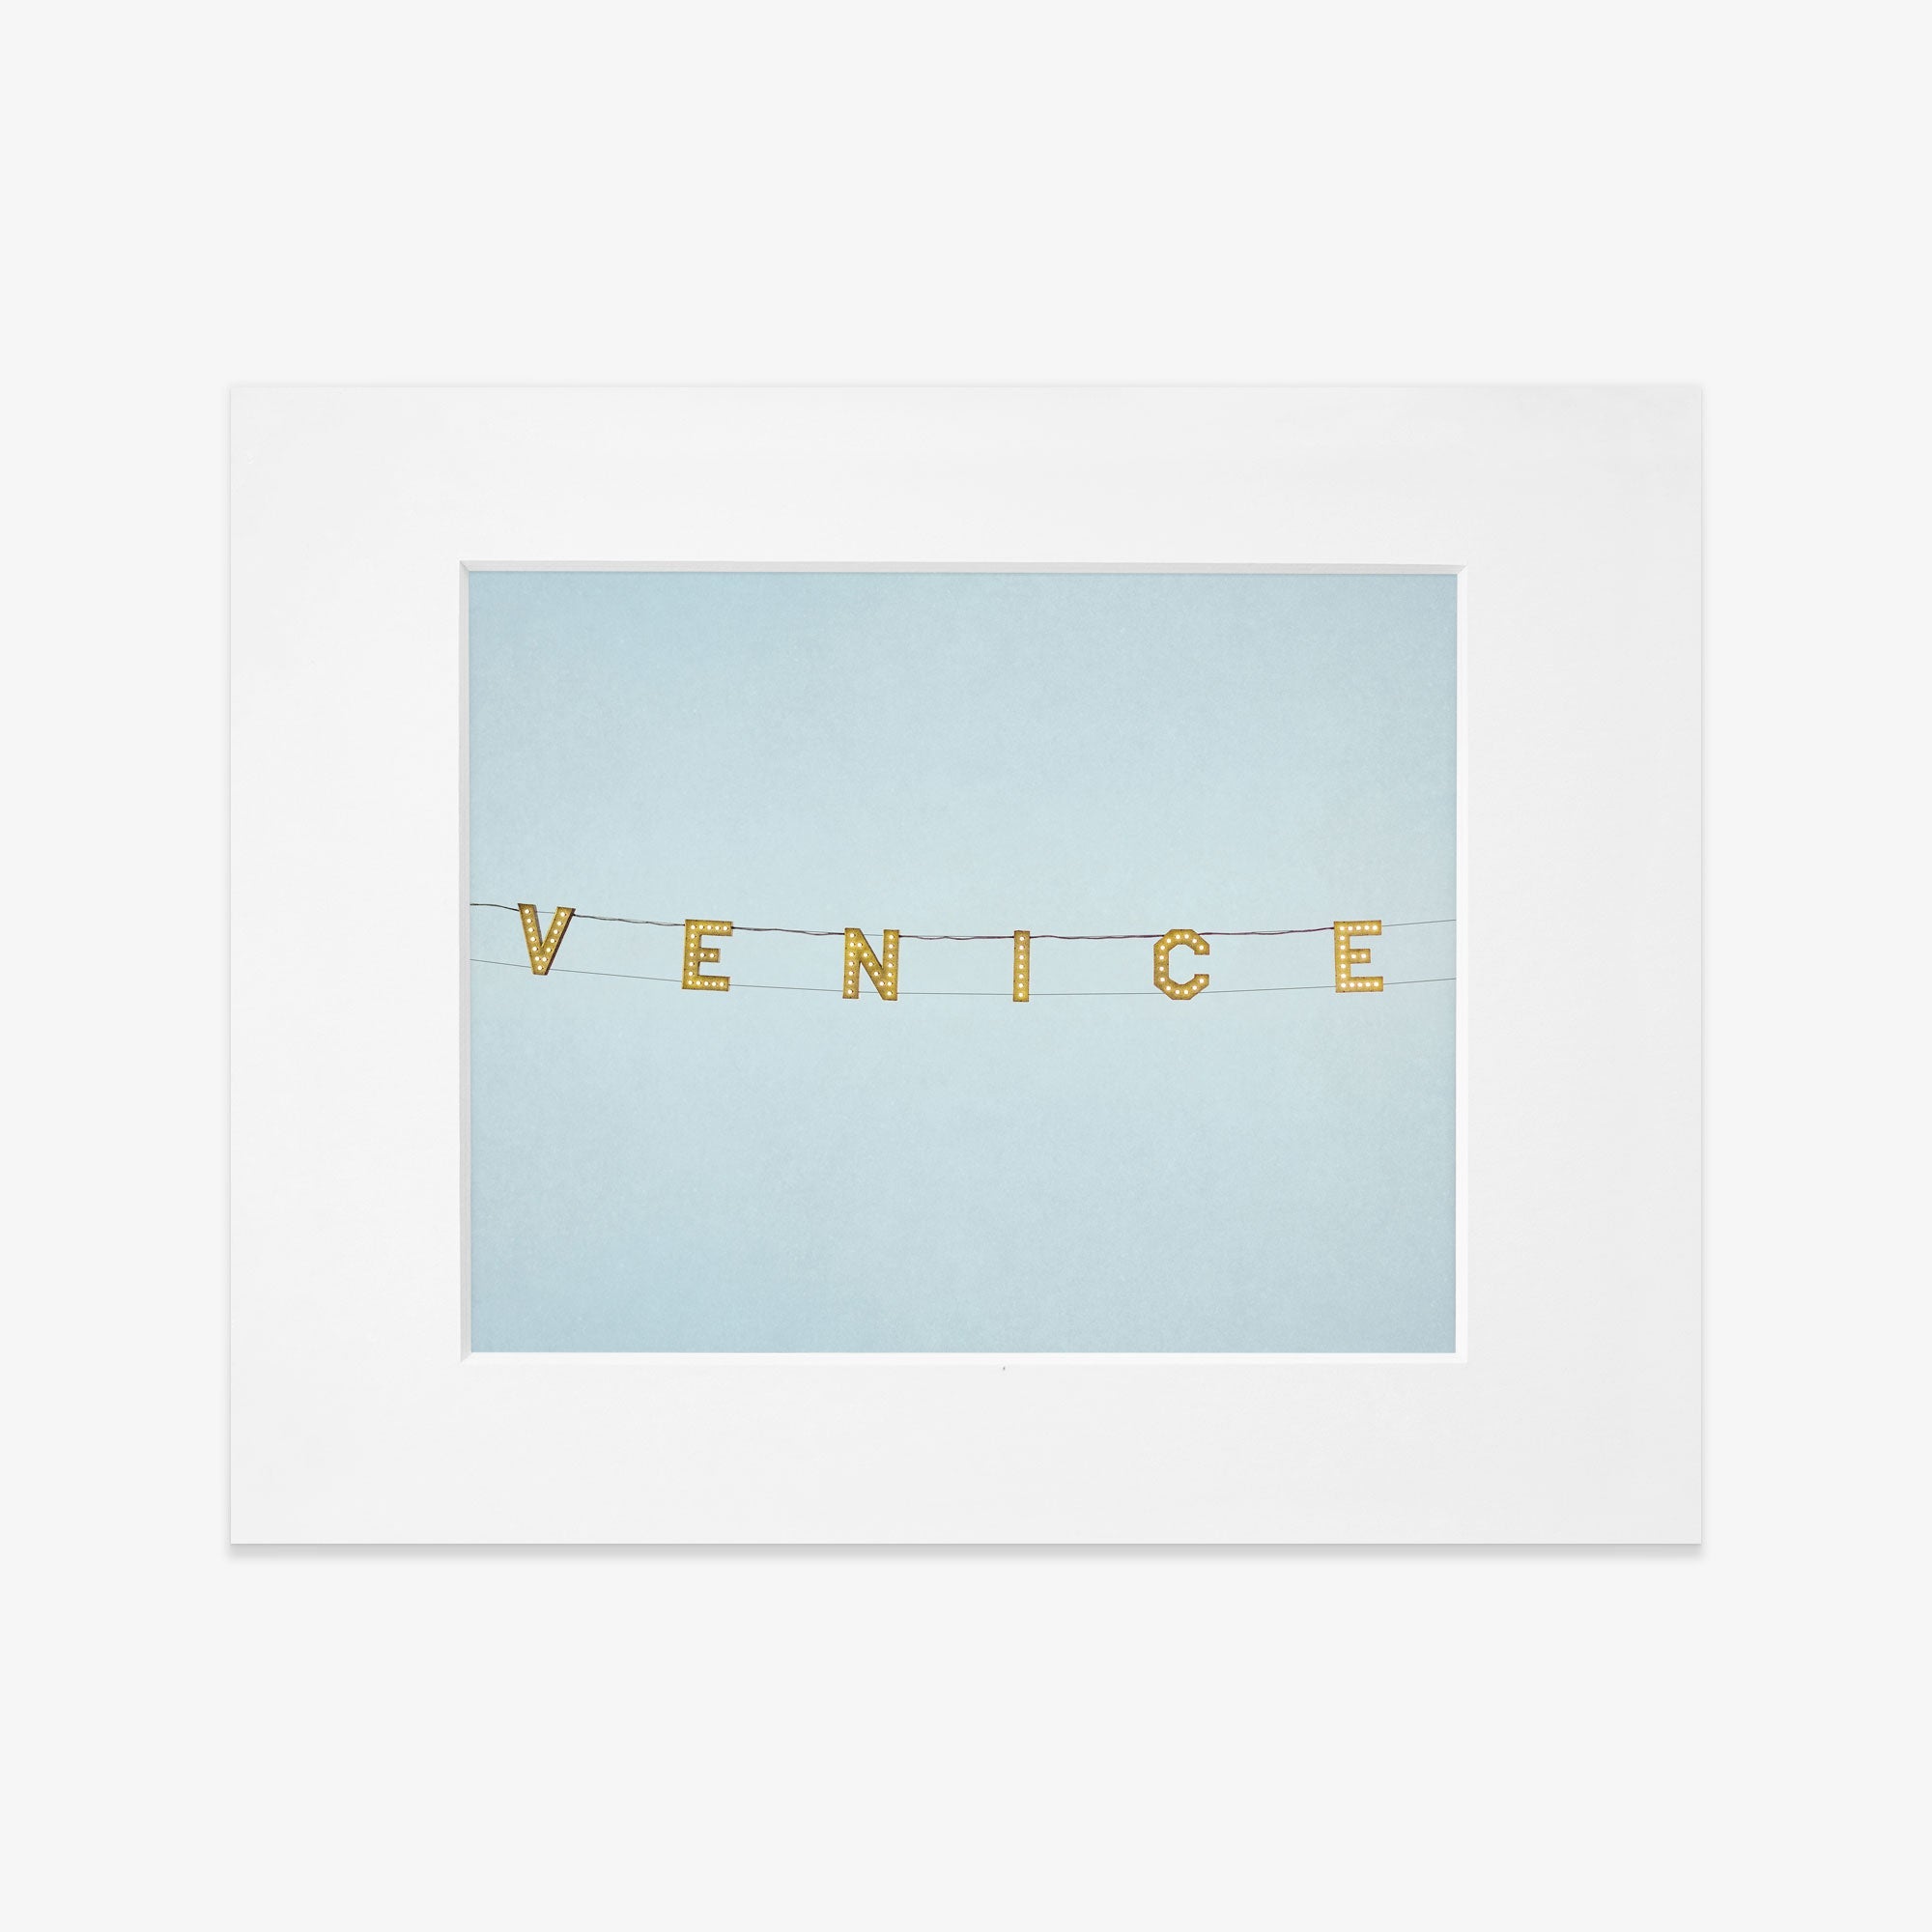 A framed photograph featuring the Venice Beach Sign Print, &#39;Blue Venice&#39; spelled out on small, gold, circular pieces strung together against a soft blue background, printed on archival photographic paper by Offley Green.